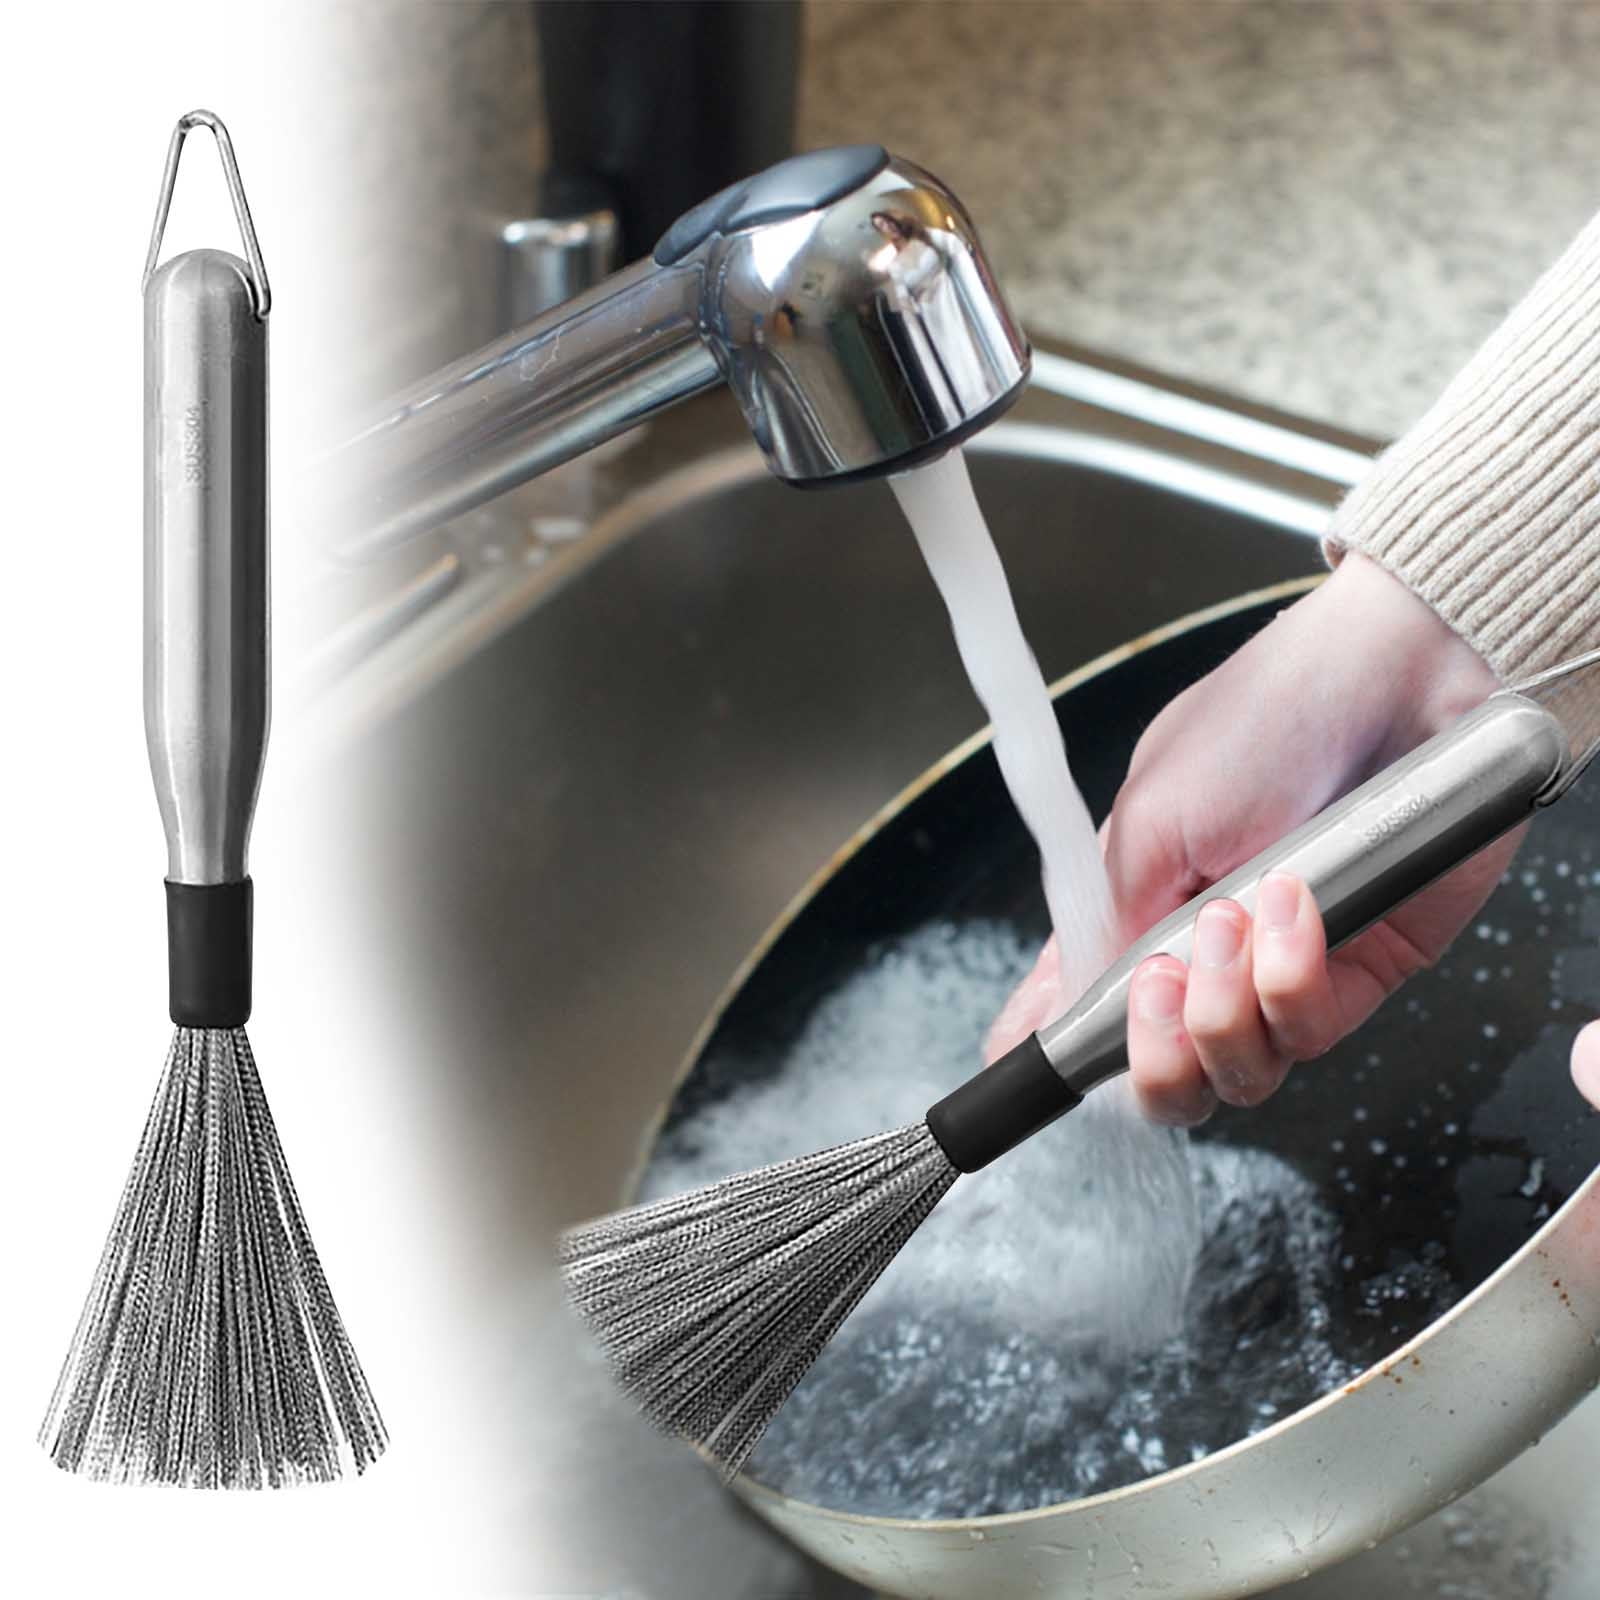 Summer Savings! WJSXC Home Cleaning Gadgets Clearance, Dishwashing Brush  with Soap Dispenser Kitchen Dishwashing Brush with Replaceable Head